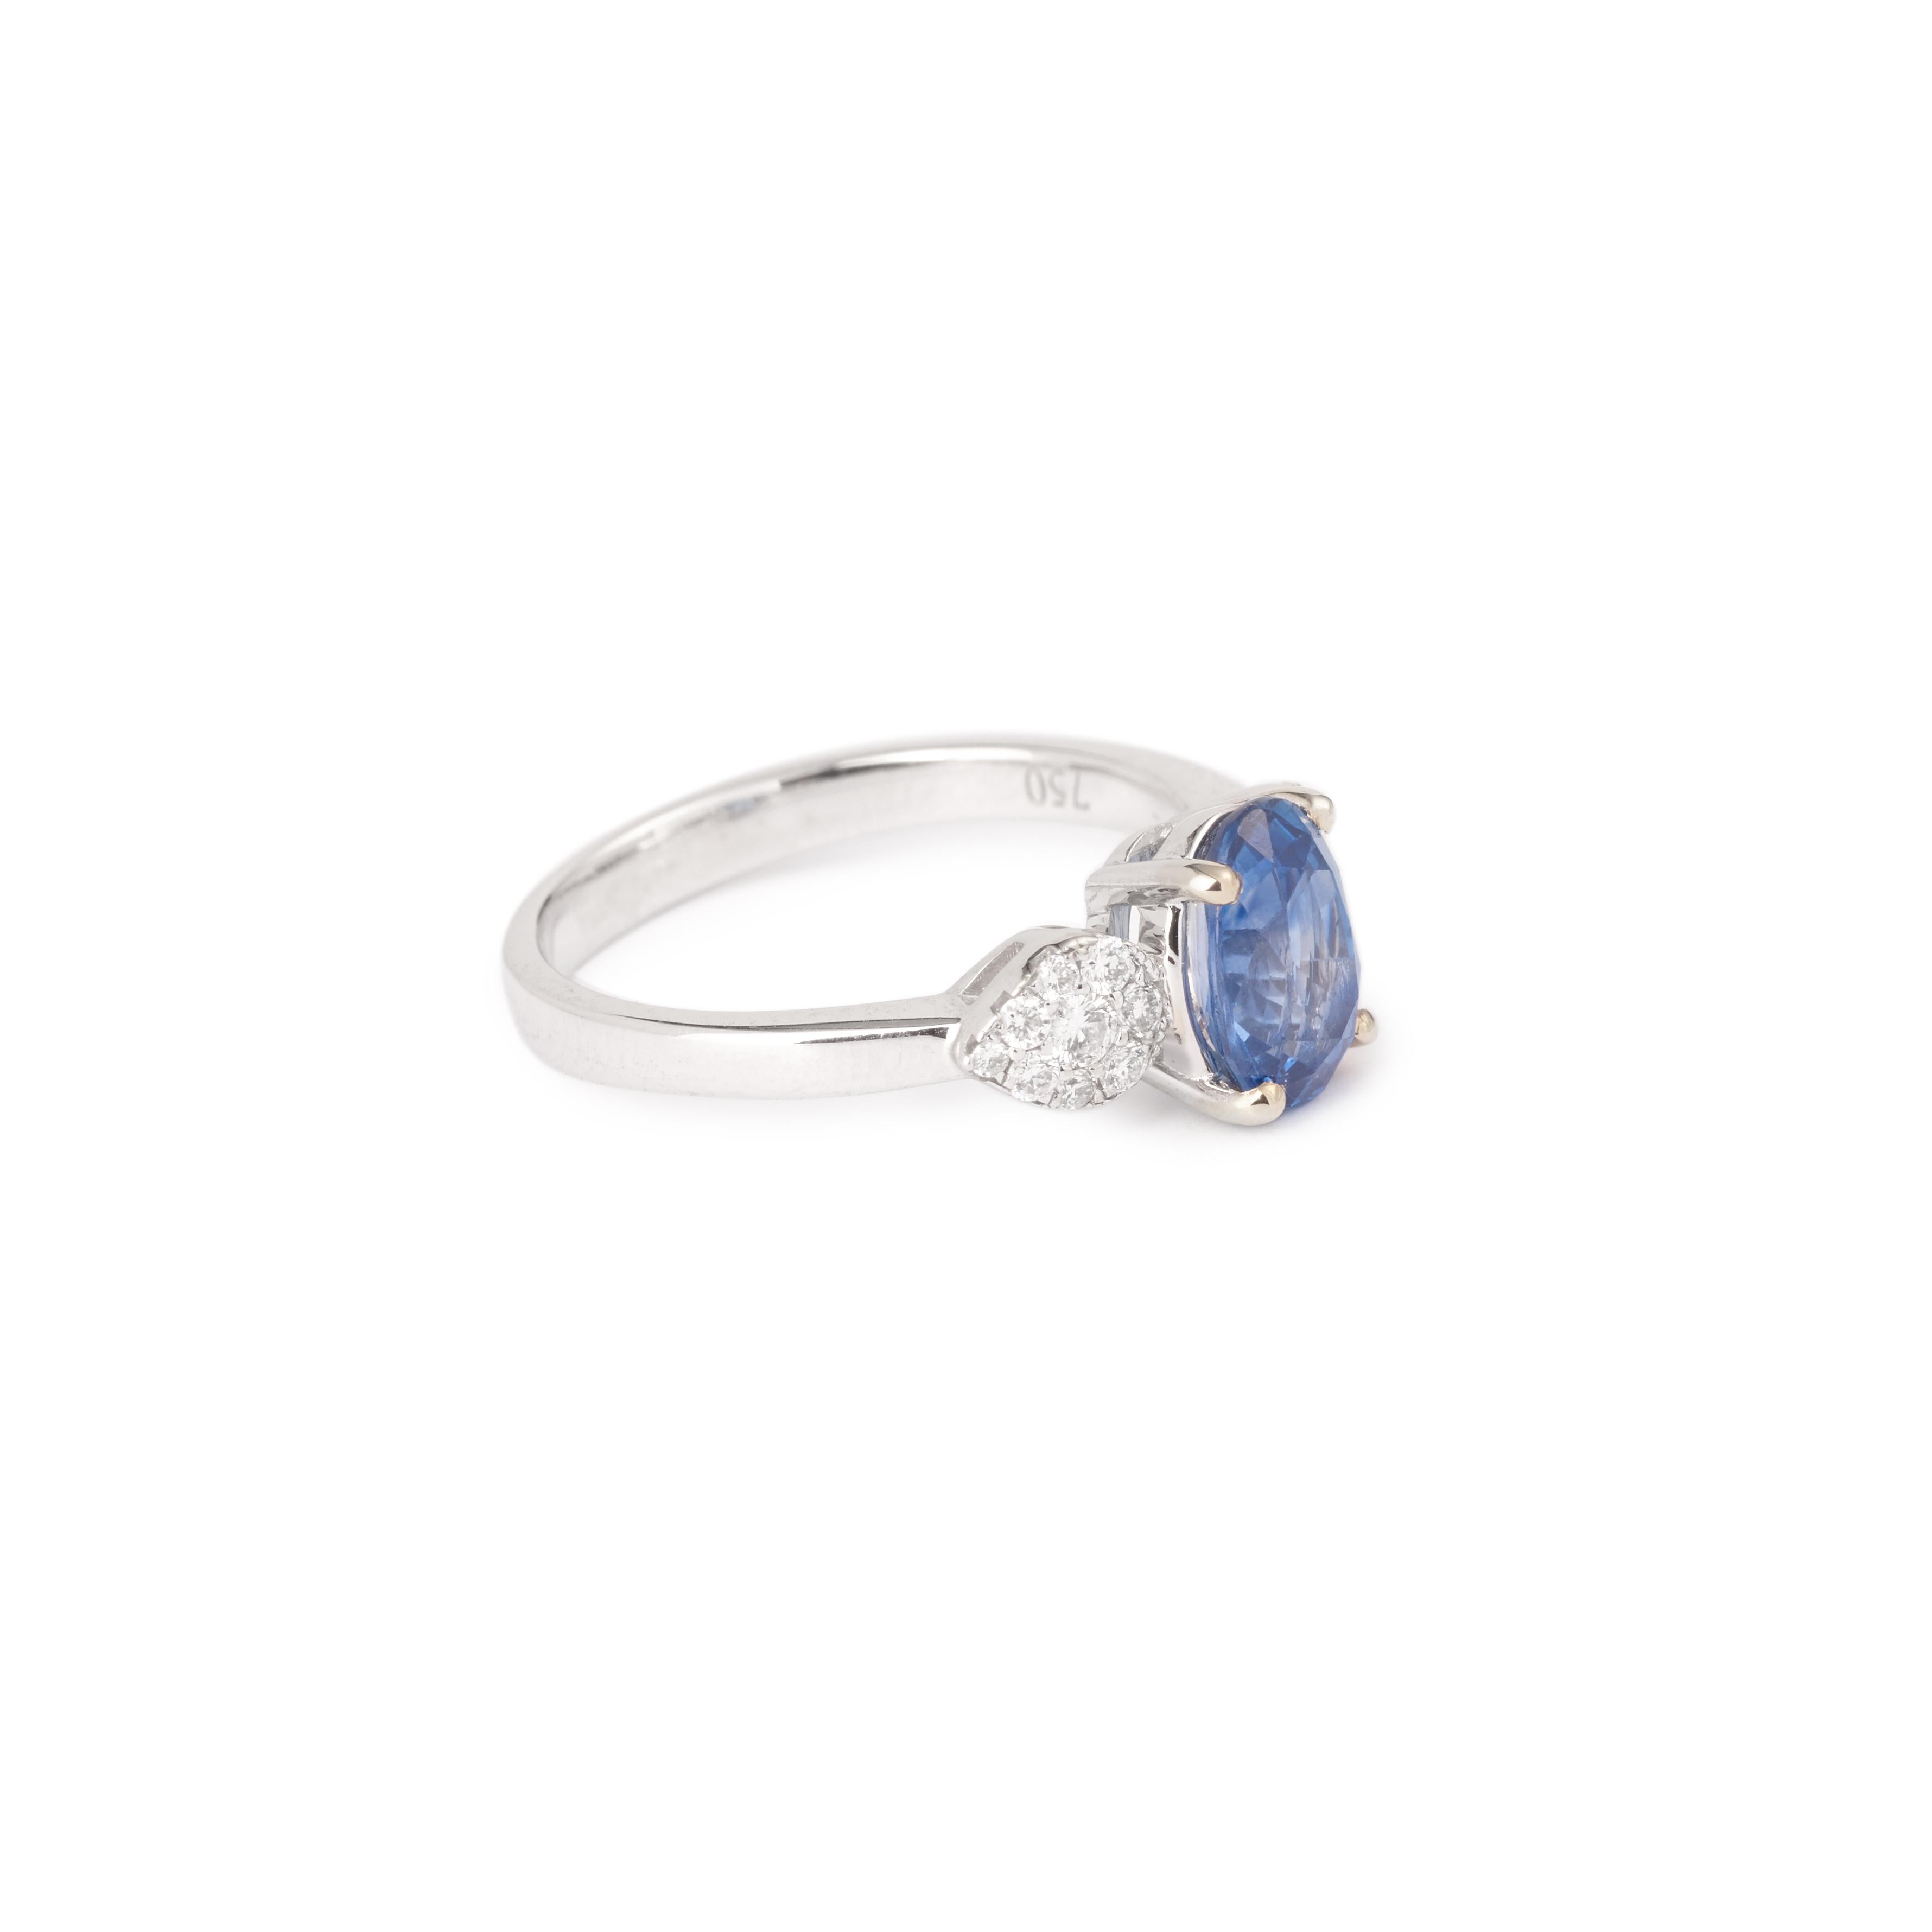 White gold ring set with a 1.69 carats oval cut sapphire of Madagascar and brilliant cut diamonds.

Dimensions sapphire : 0,81 x 0,58 x 0,41 cm, (0,317 x 0,227 x 0,160 inch)

Sapphire weight: 1.69 carats

Total weight of diamonds: 0.22 carats

Ring